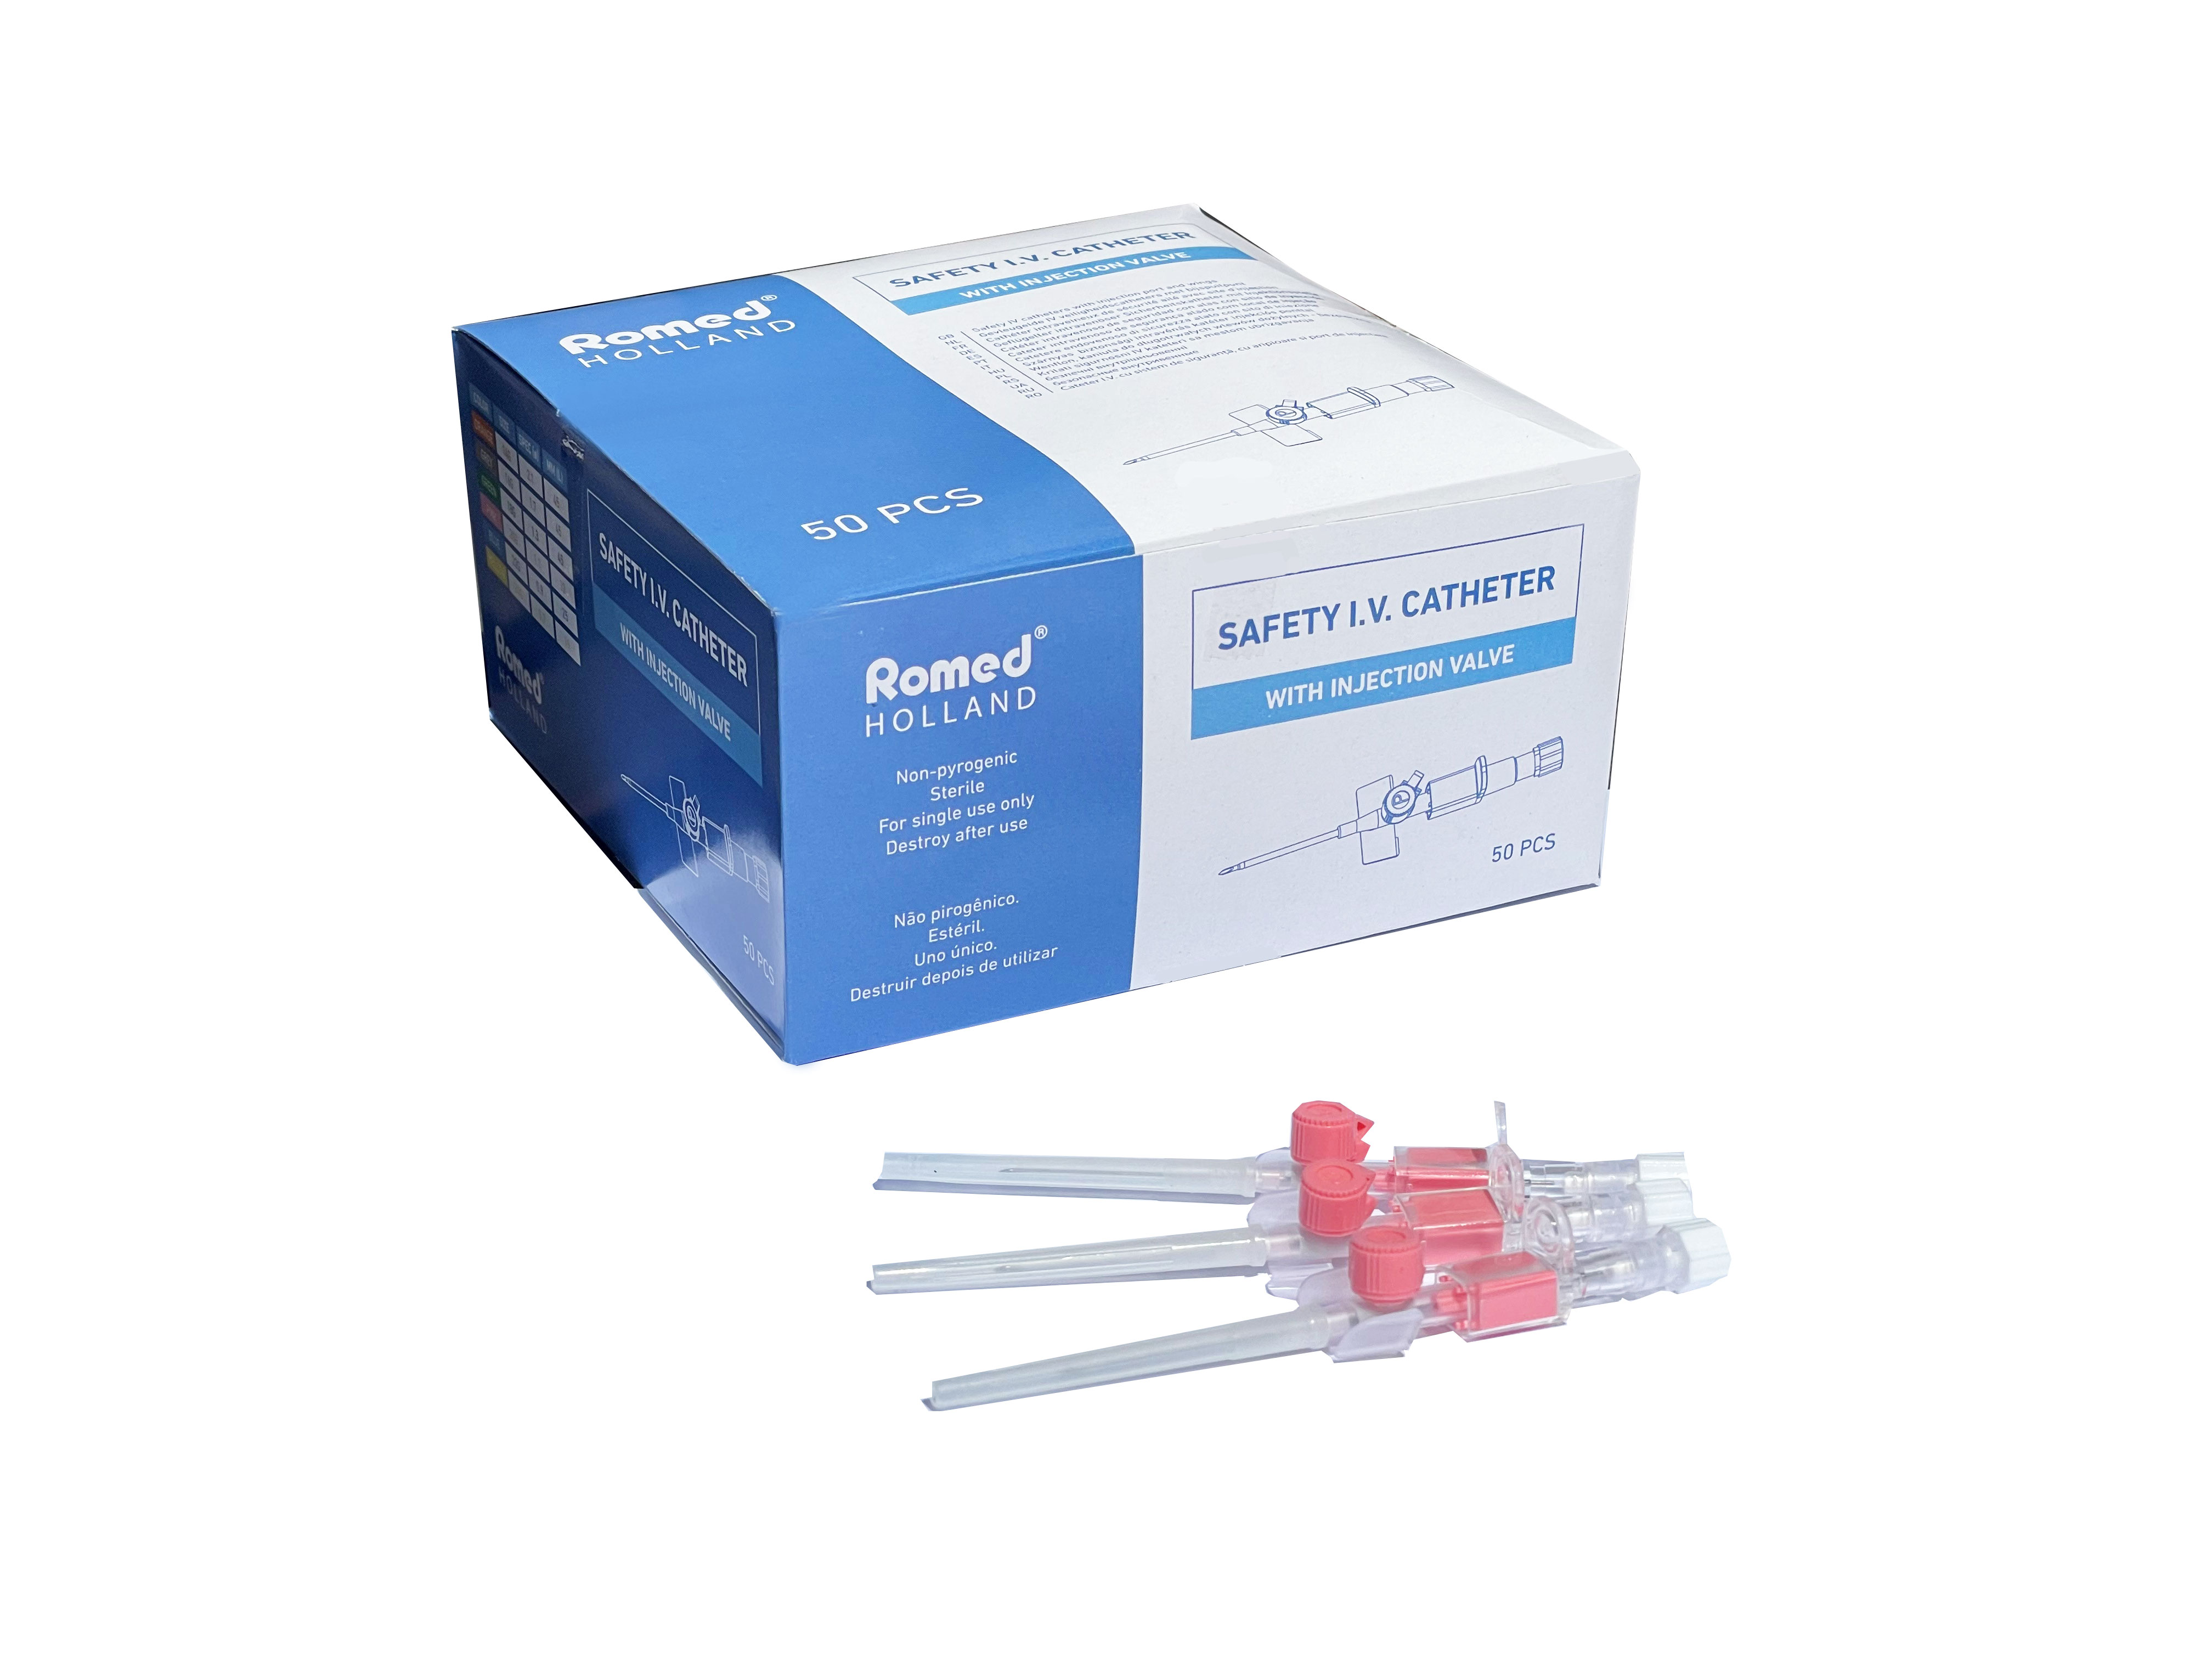 S-IVCATH-20G Romed Safety I.V. catheters with injection valve, 20G, sterile per piece, 50 pcs in an inner box, 10 x 50 pcs = 500 pcs in a carton.